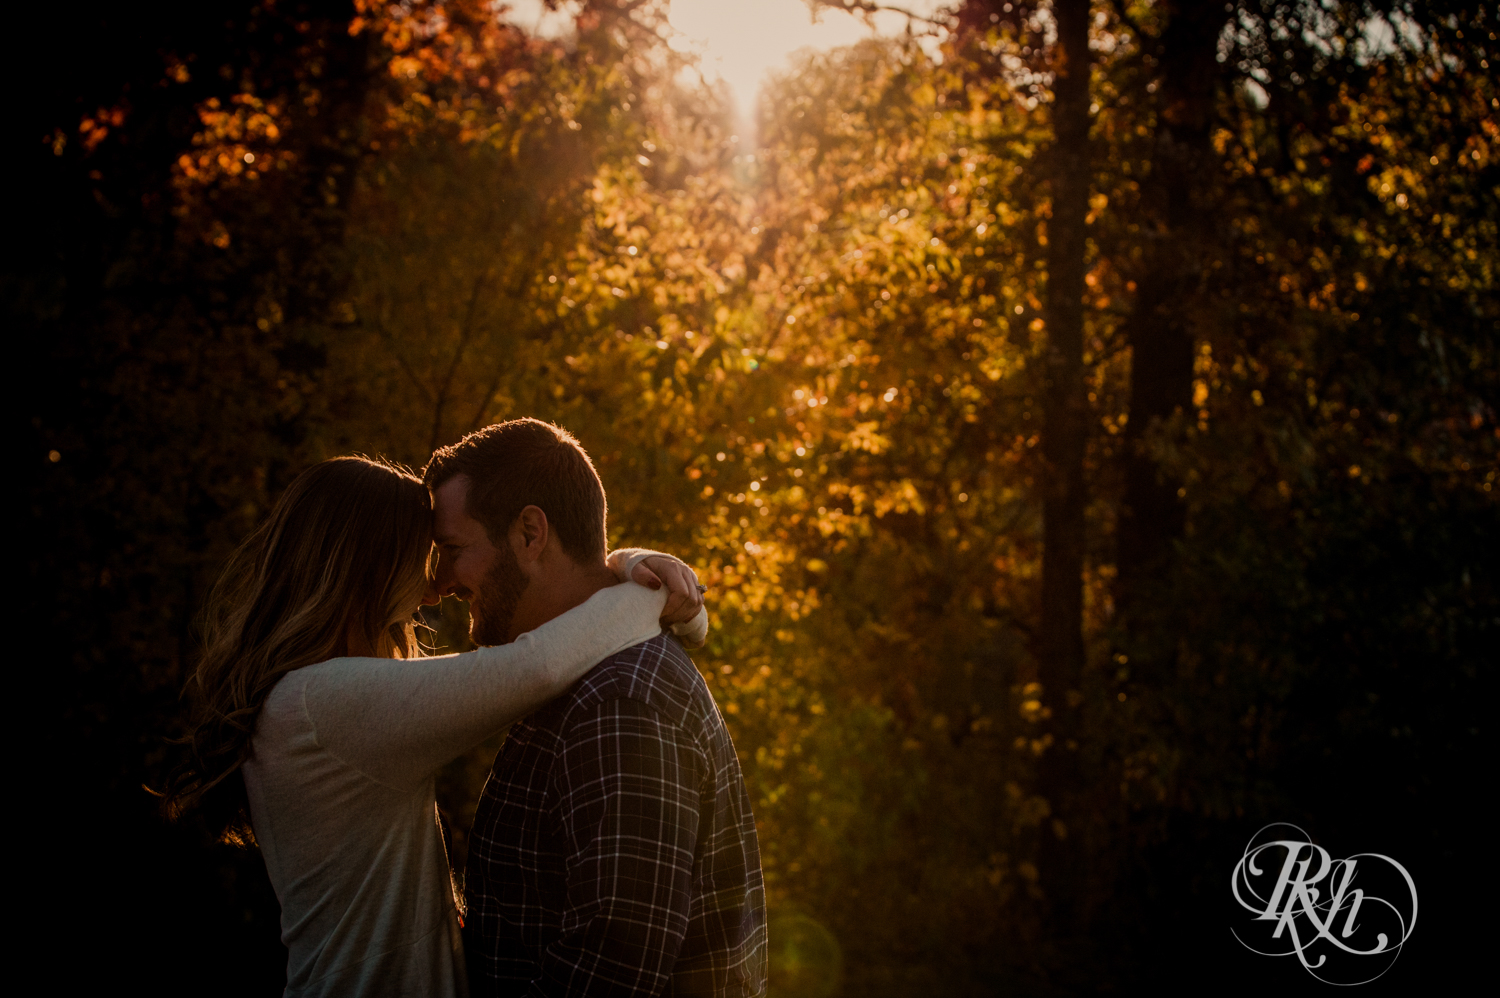 Man and woman smile during golden hour engagement photos at Lebanon Hills in Eagan, Minnesota.